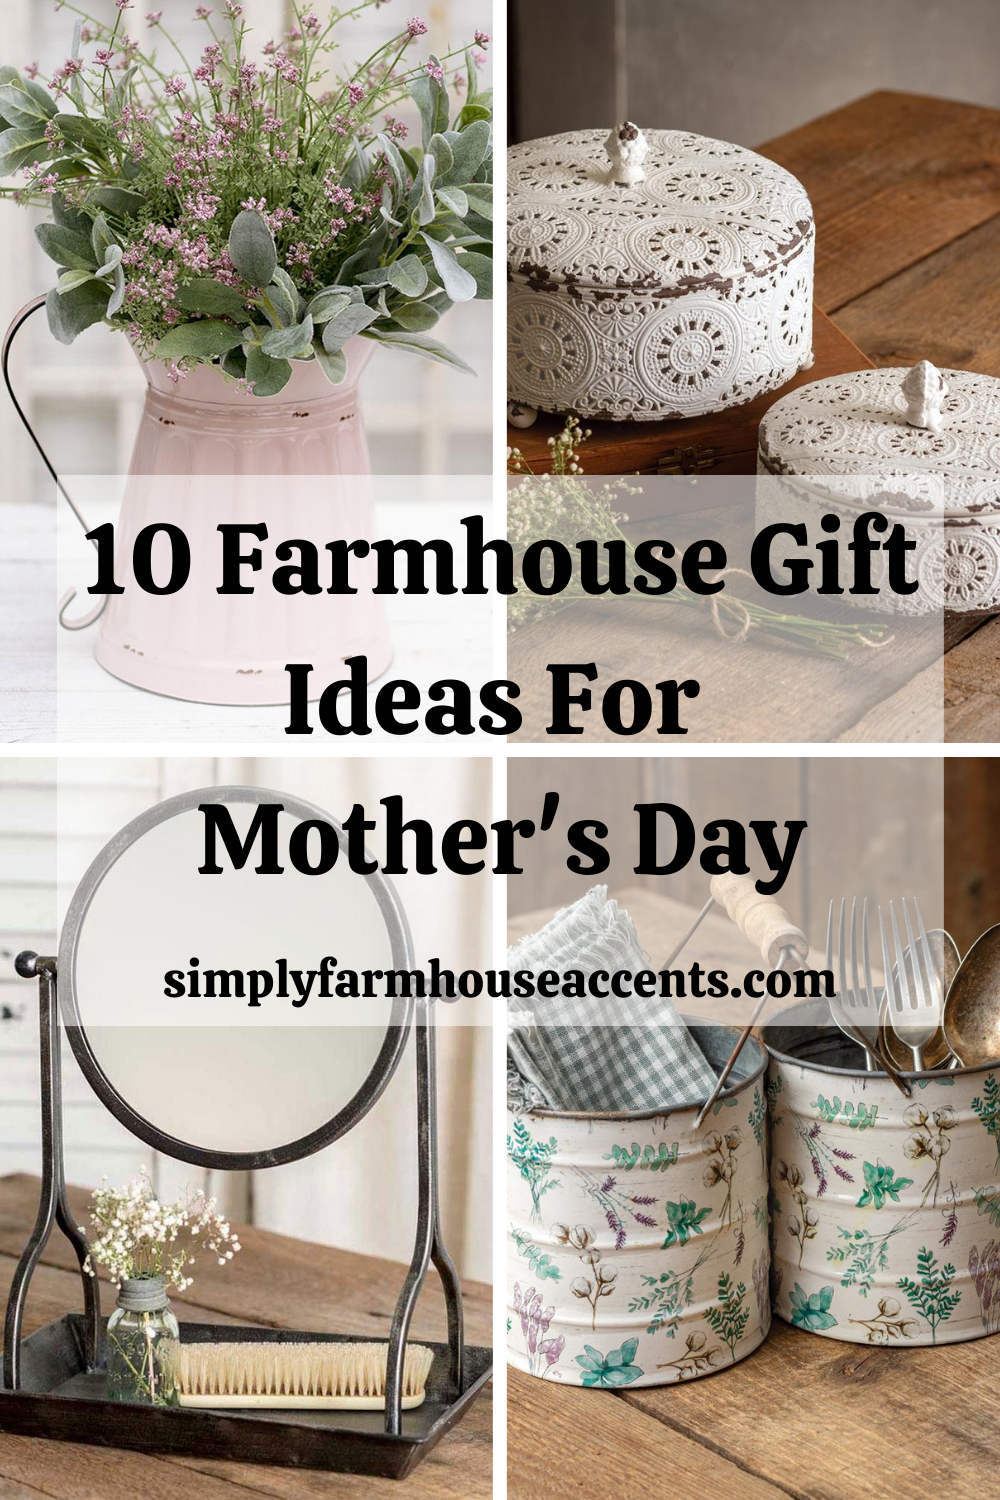 https://simplyfarmhouseaccents.com/wp-content/uploads/2021/04/10-Farmhouse-Gift-Ideas-For-Mothers-Day.png